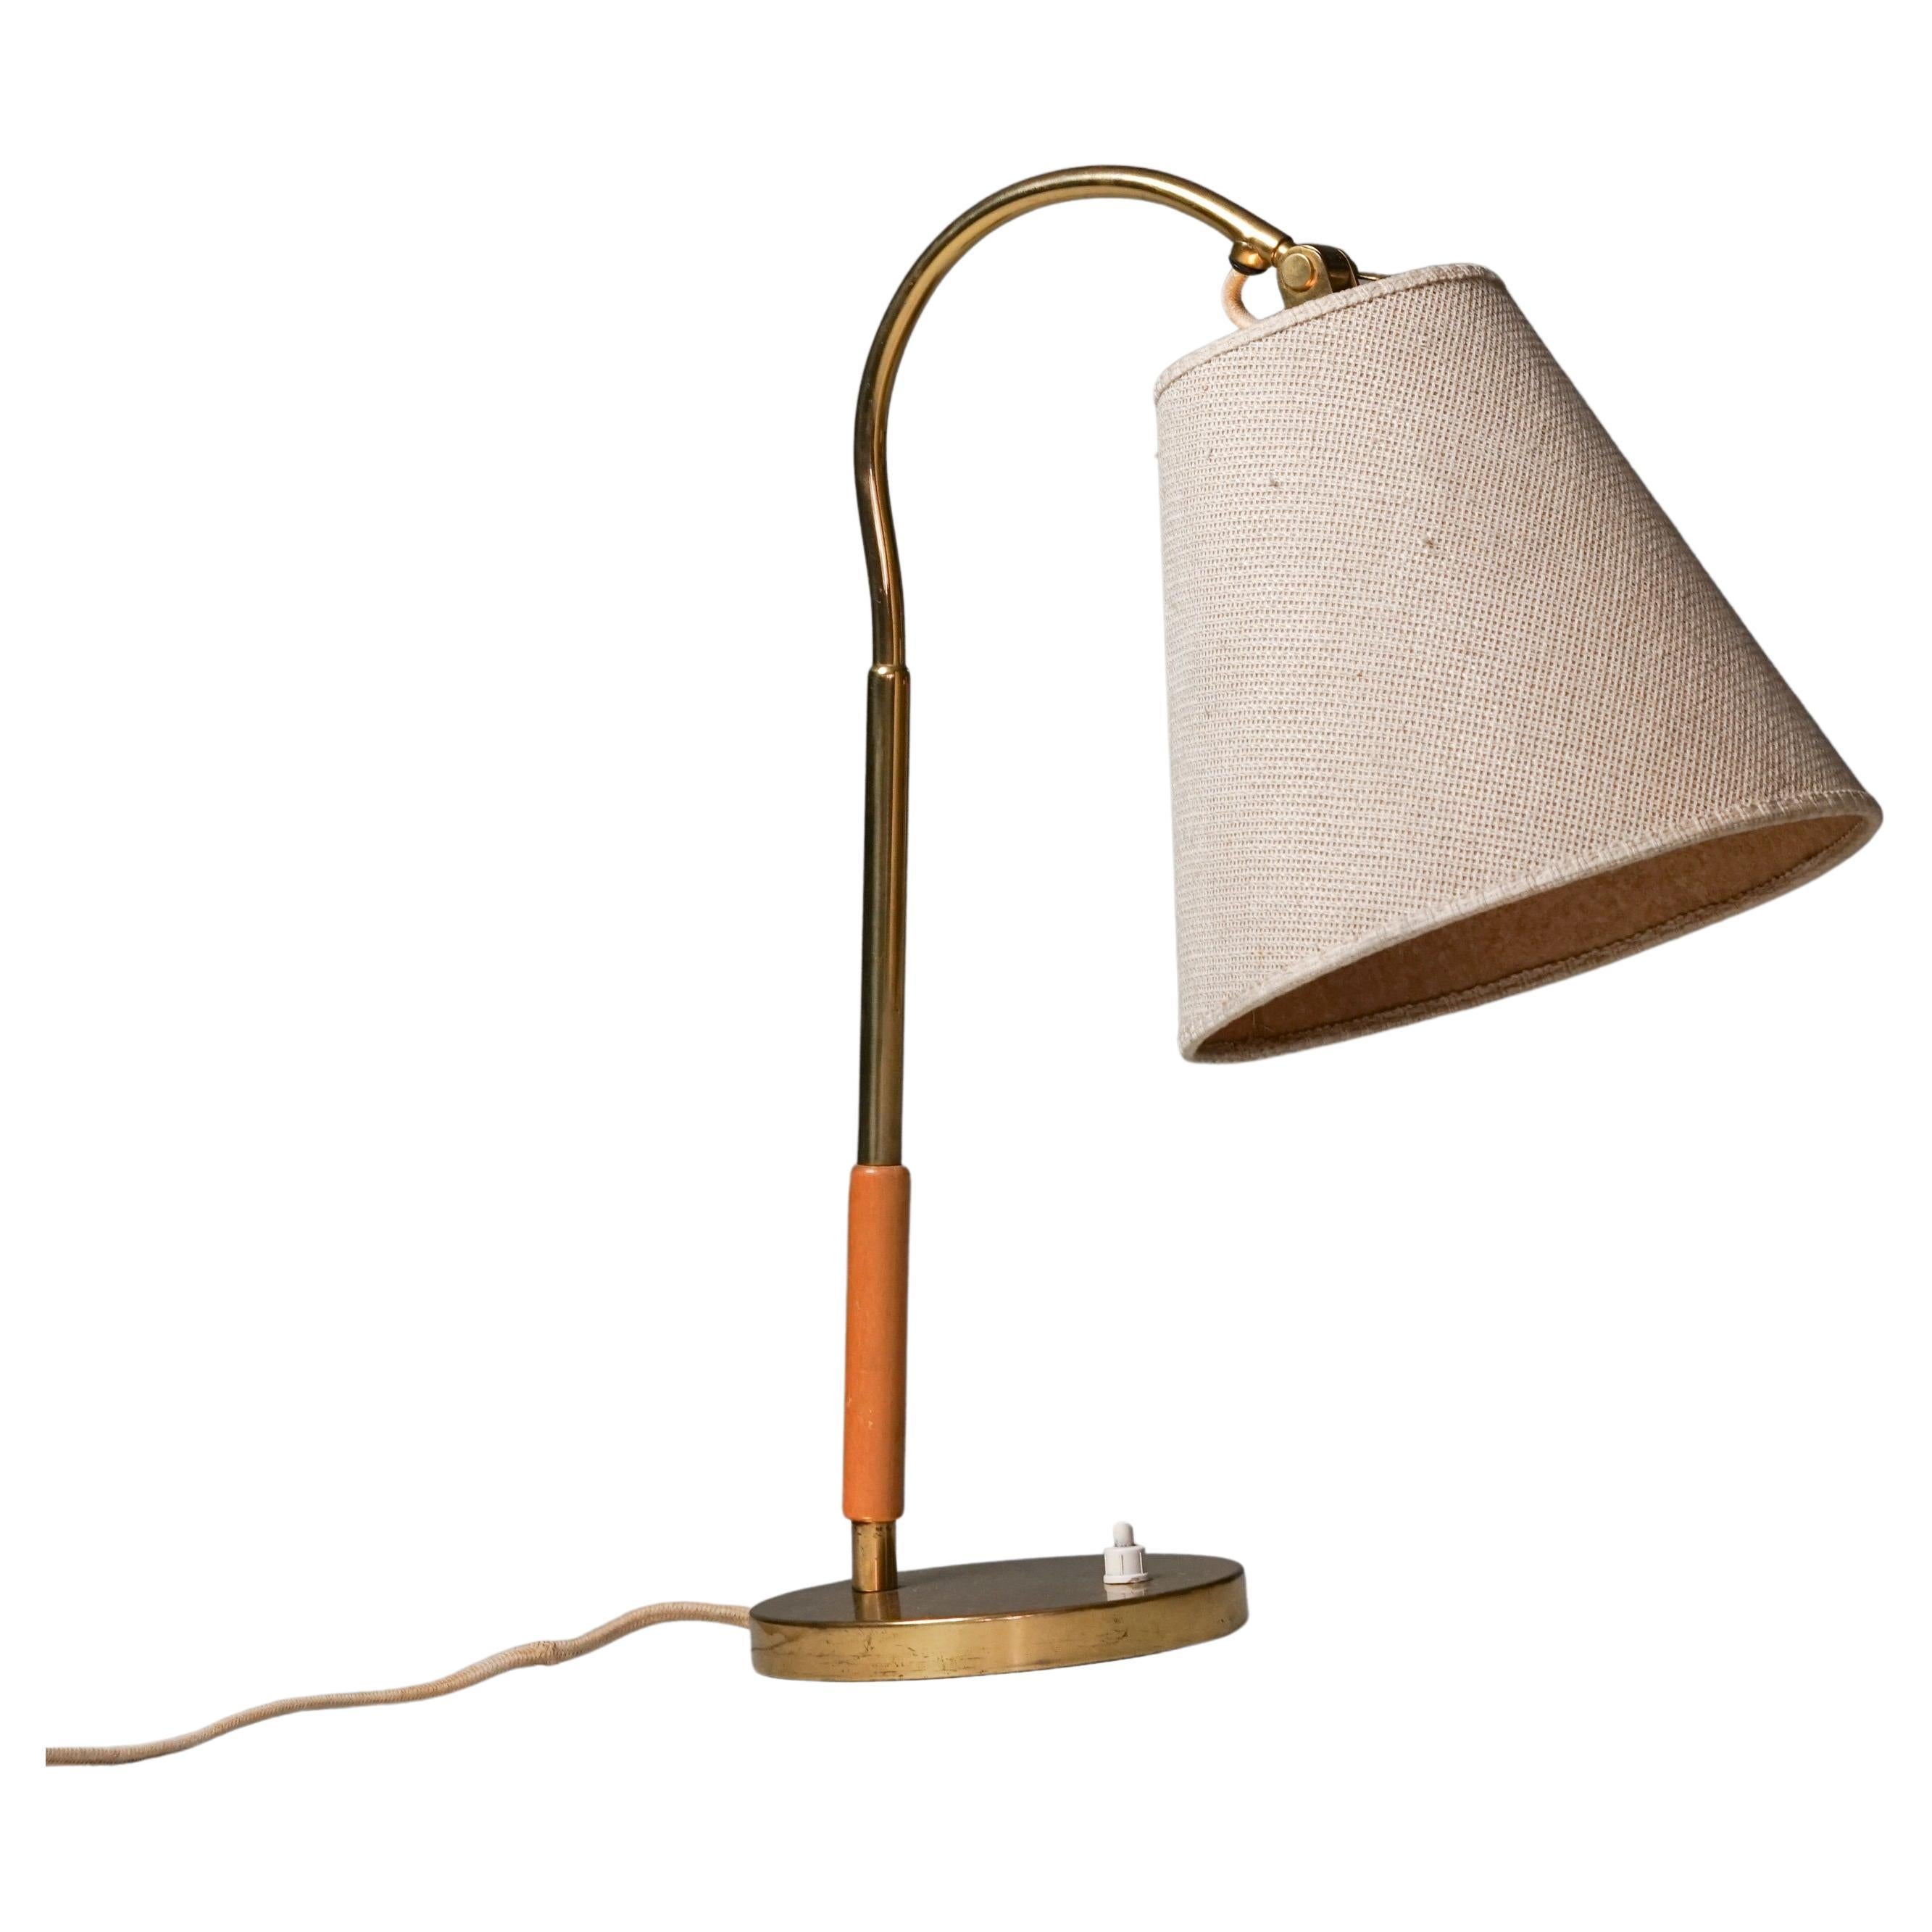 Model 9201 table lamp, designed by Paavo Tynell, manufactured by Taito Oy, 1940/1950s. Brass frame with original fabric lampshade and wood detail. Good vintage condition, minor patina consistent with age and use. Timeless Scandinavian Modern